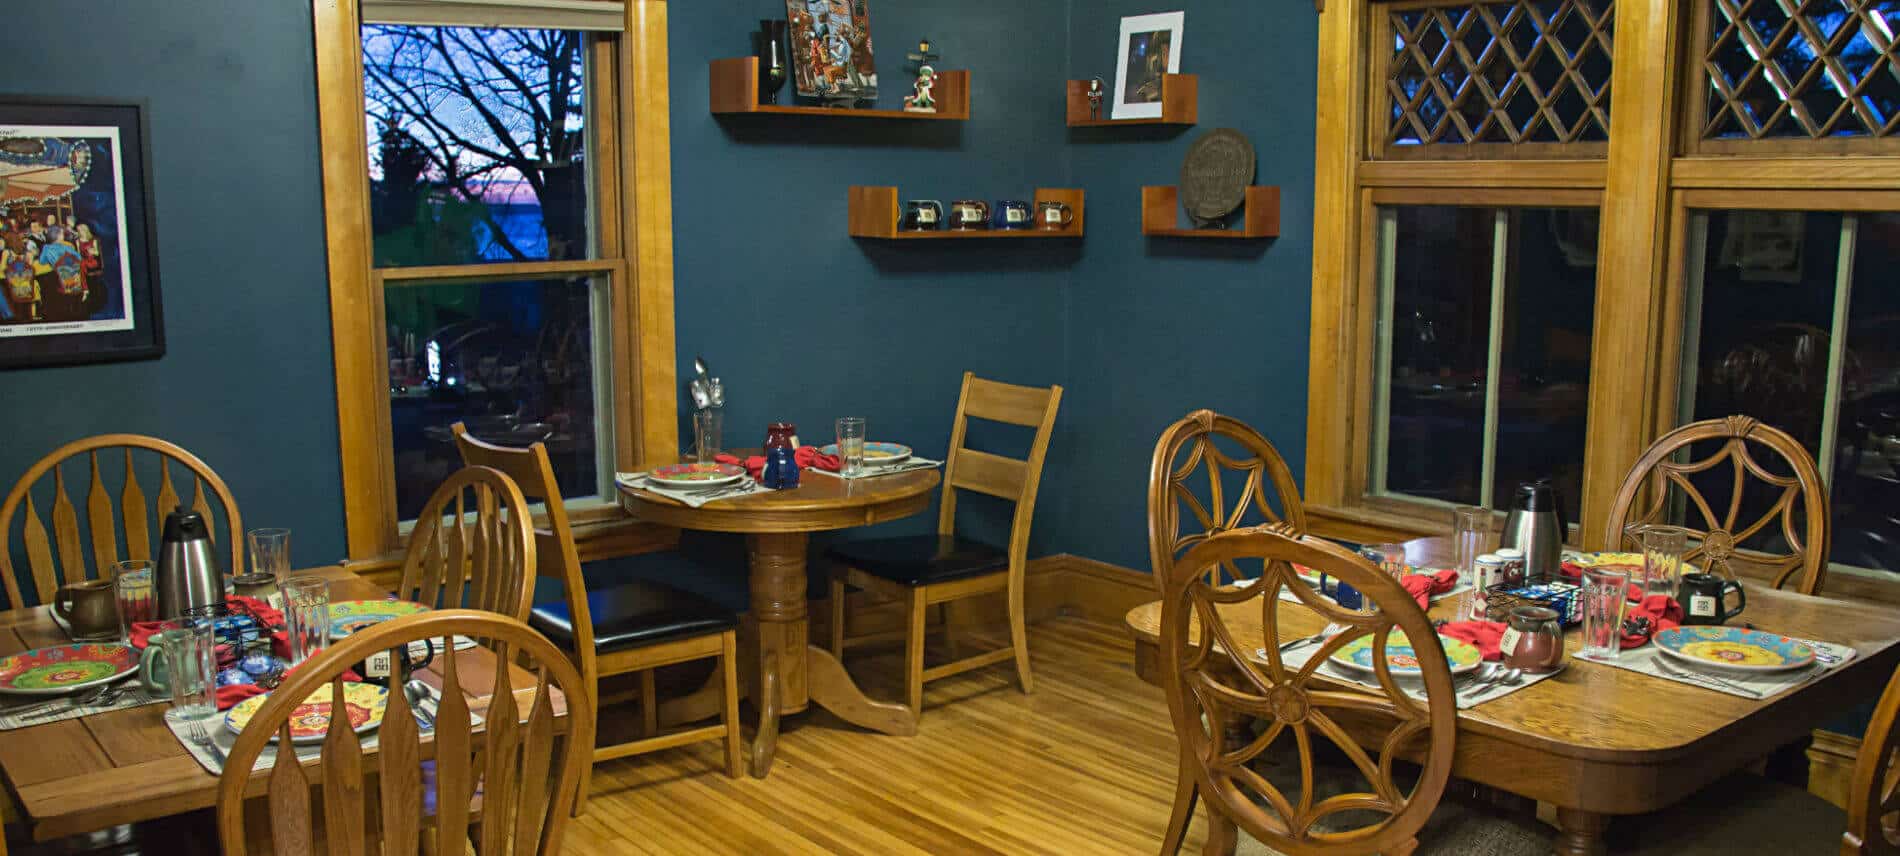 Blue dining room with wood floors, three individual dining tables set for breakfast, and large windows